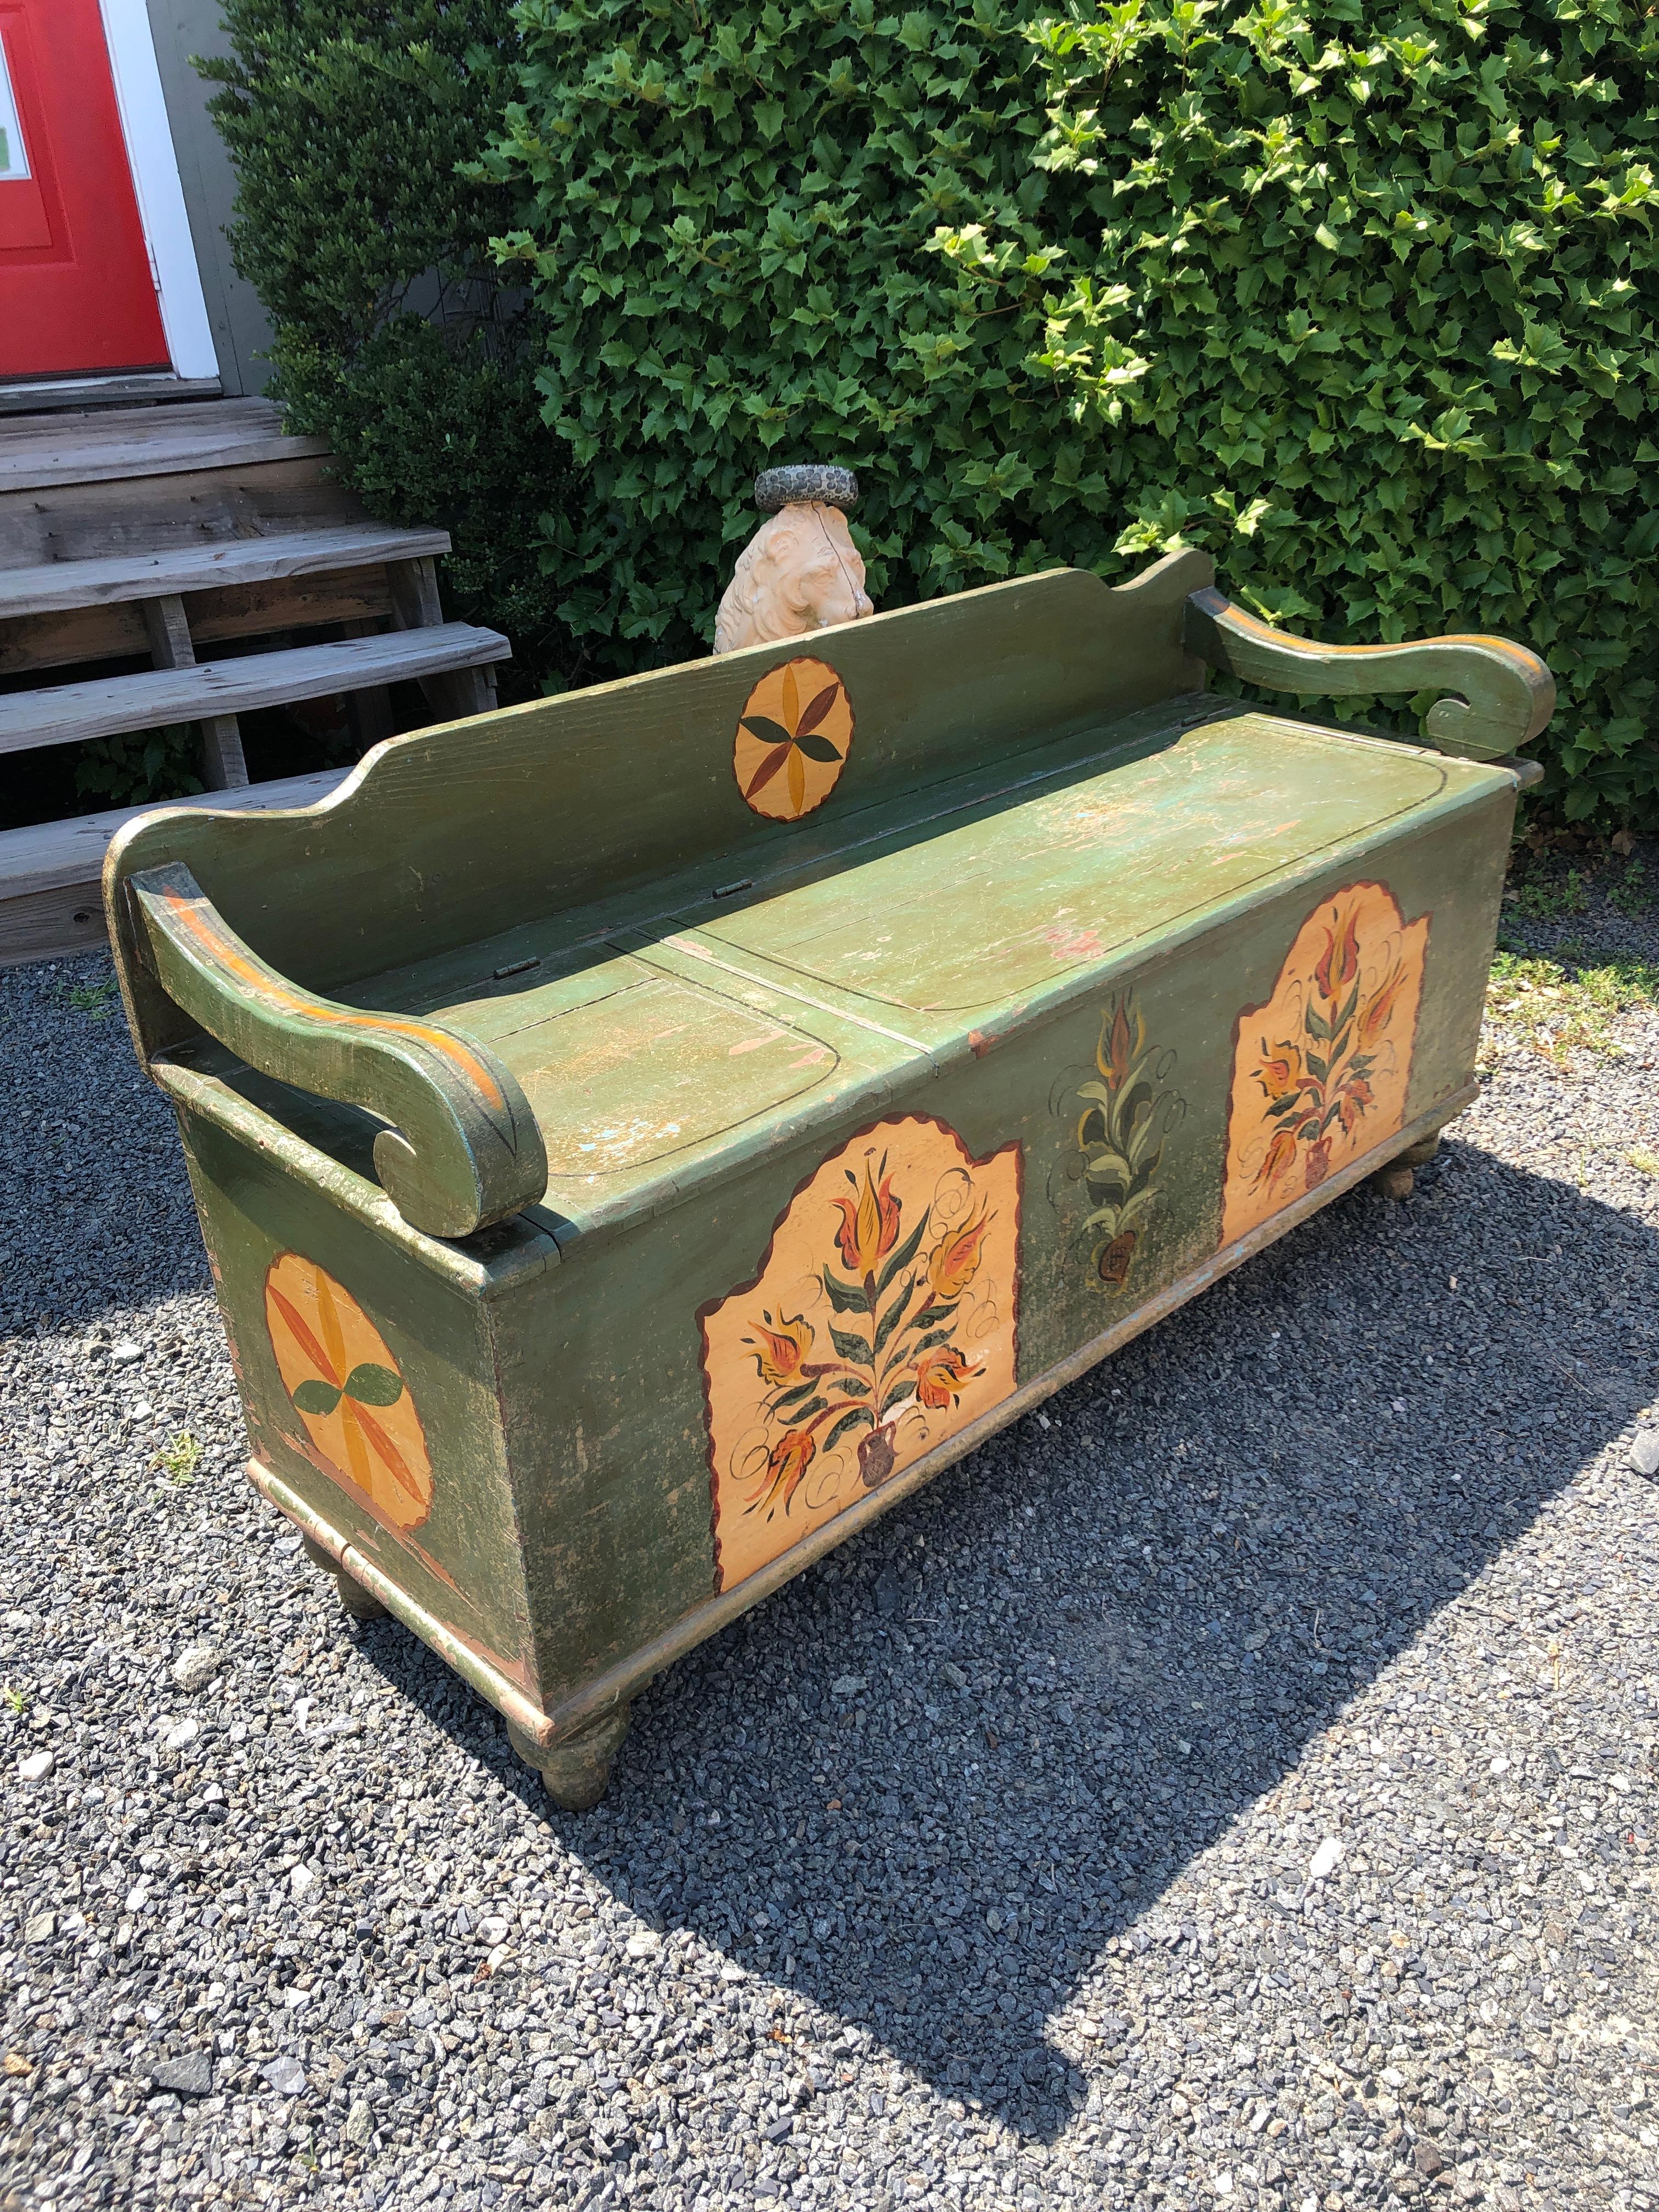 Hand painted rustic distressed earthy green Amish bench having country style decoration in light gold, green and orange. The seat lifts up in two panels to reveal functional storage inside. Would be great in a mudroom or hallway.
Measures: seat